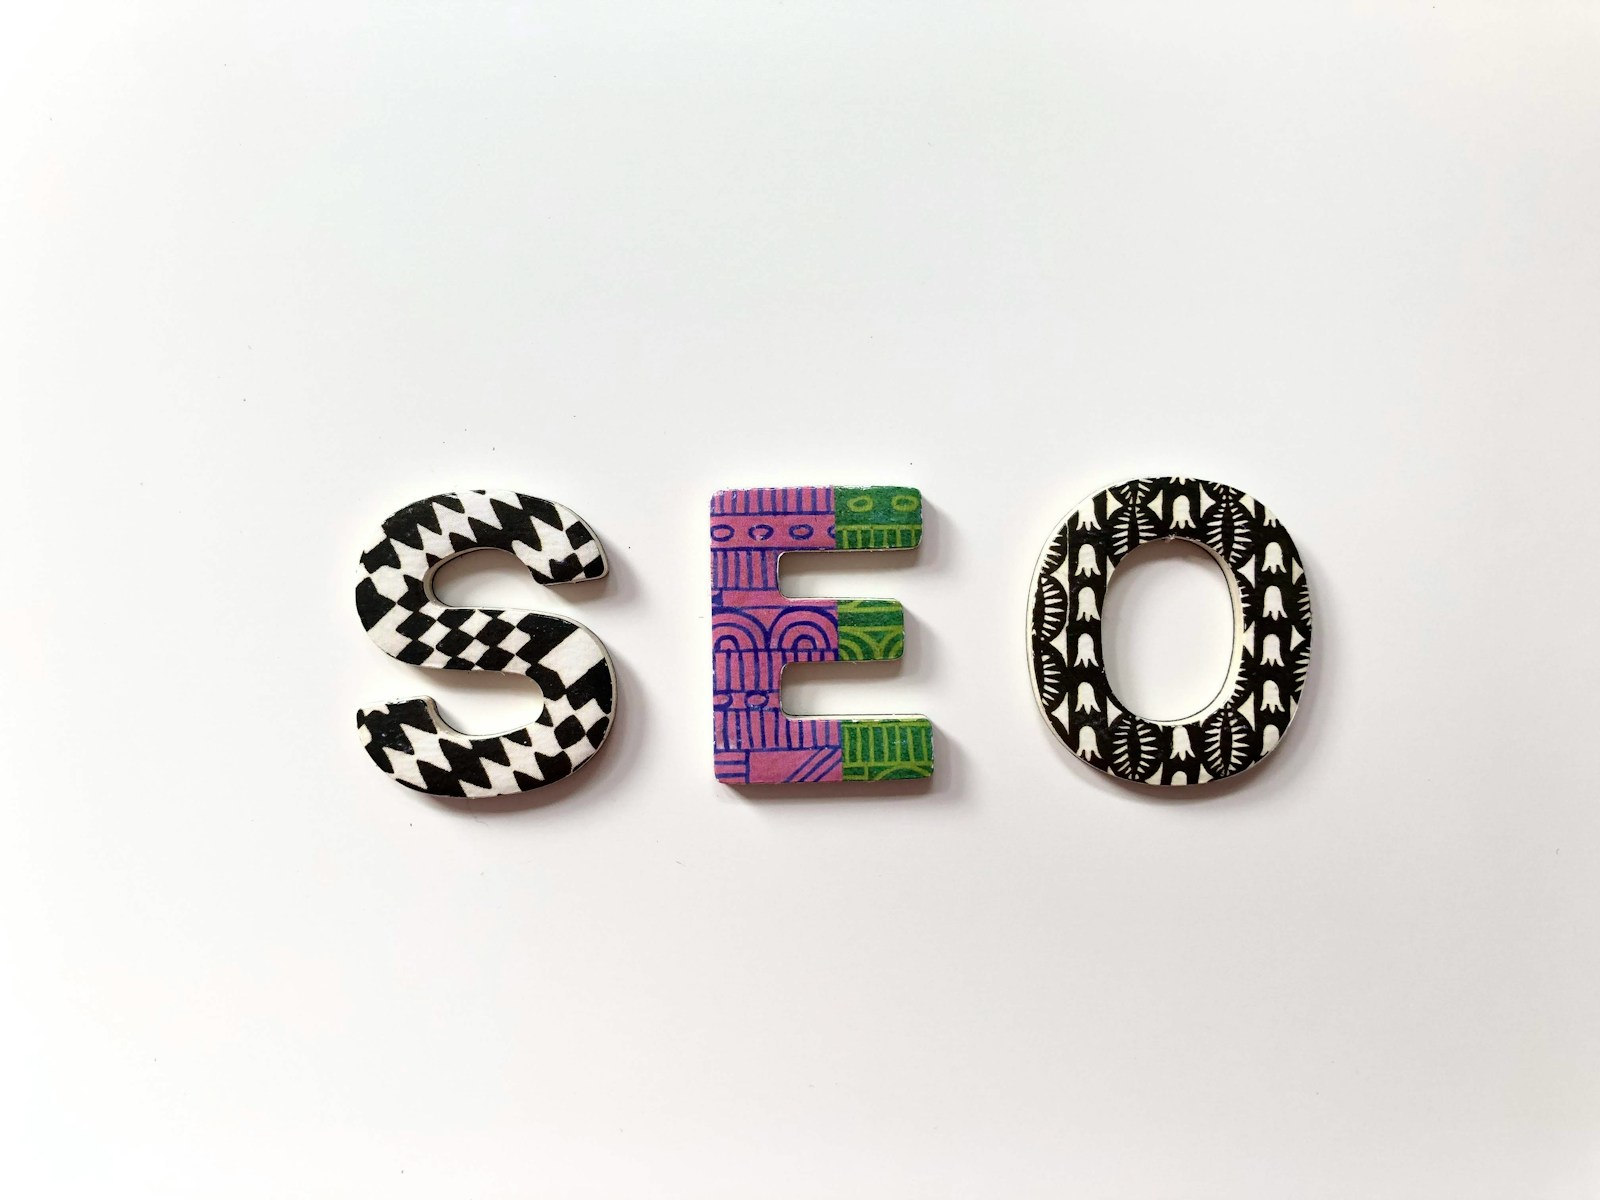 Why is SEO Important for Your Business?